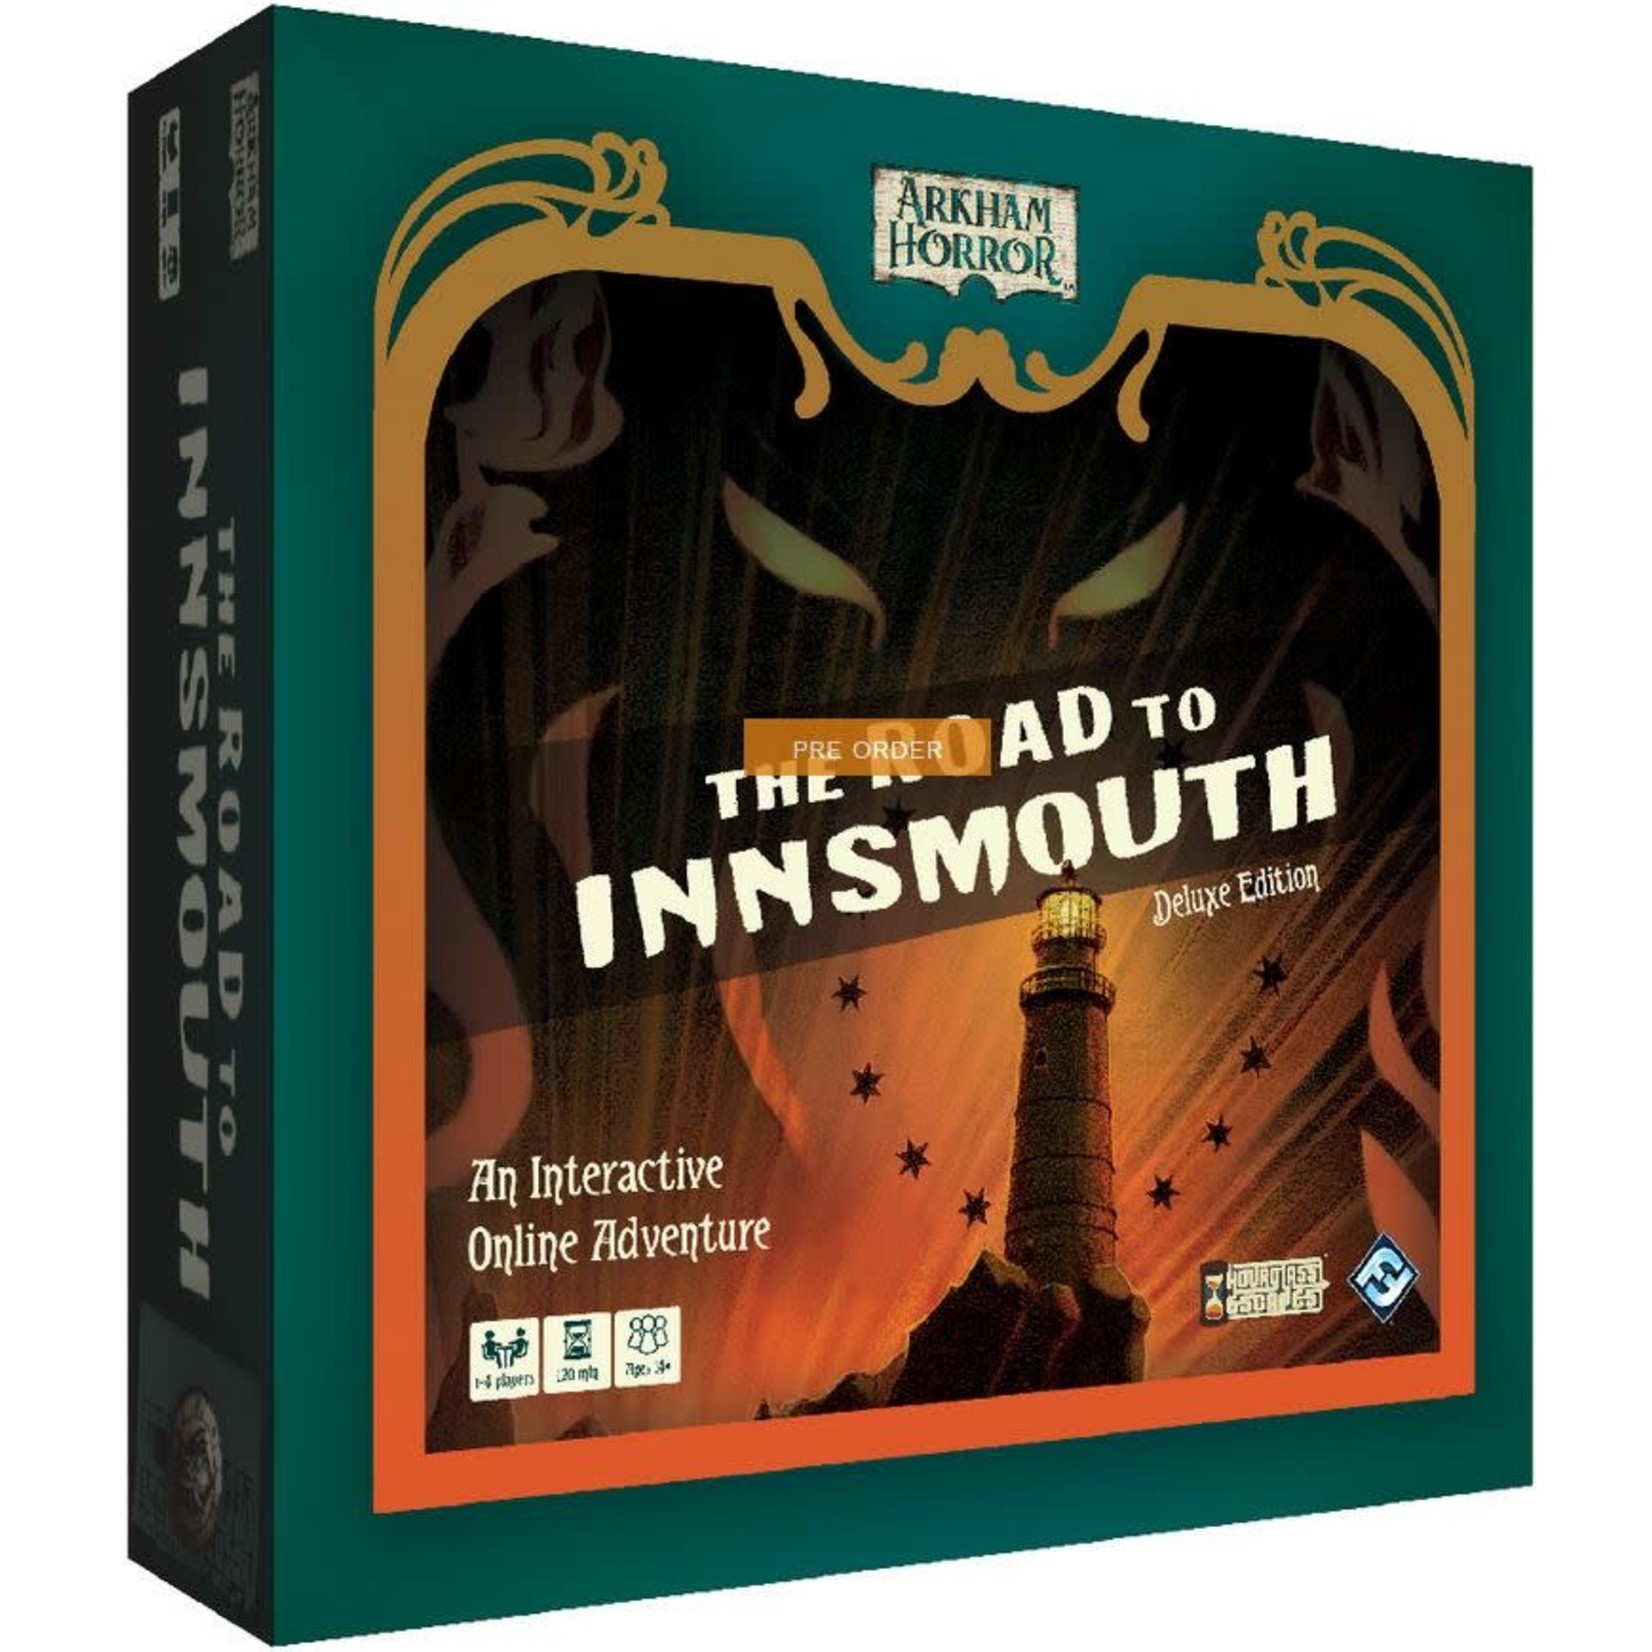 Arkham Horror: The Road to Innsmouth Deluxe Edition